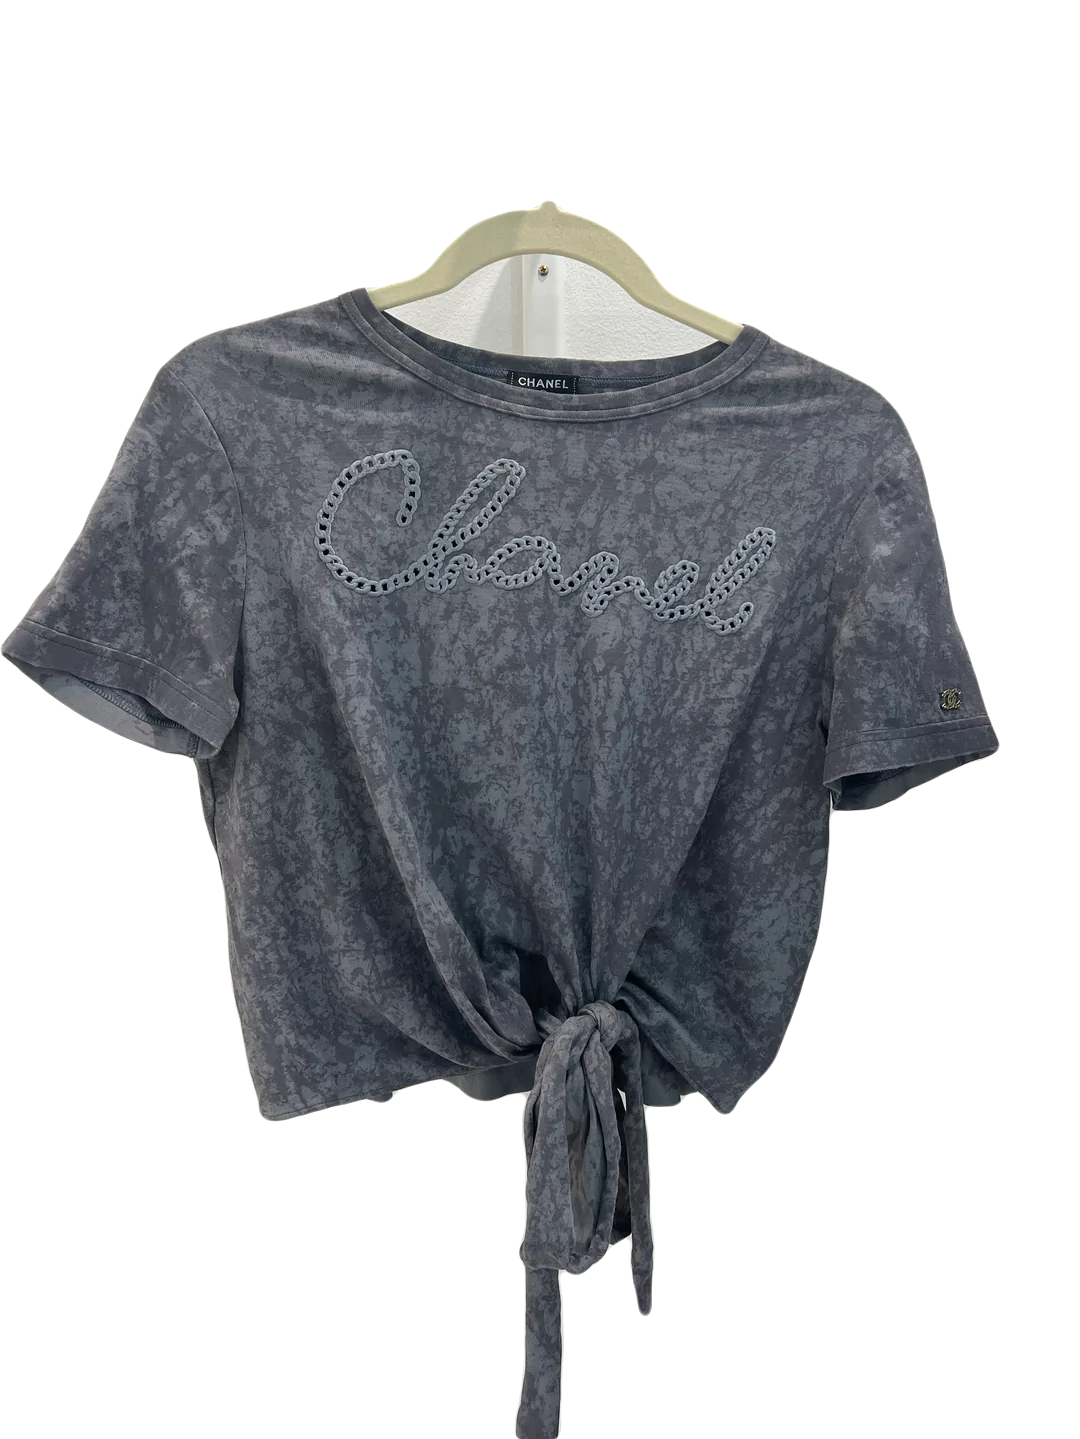 Chanel Grey T-Shirt - Size 38/40 - SOLD